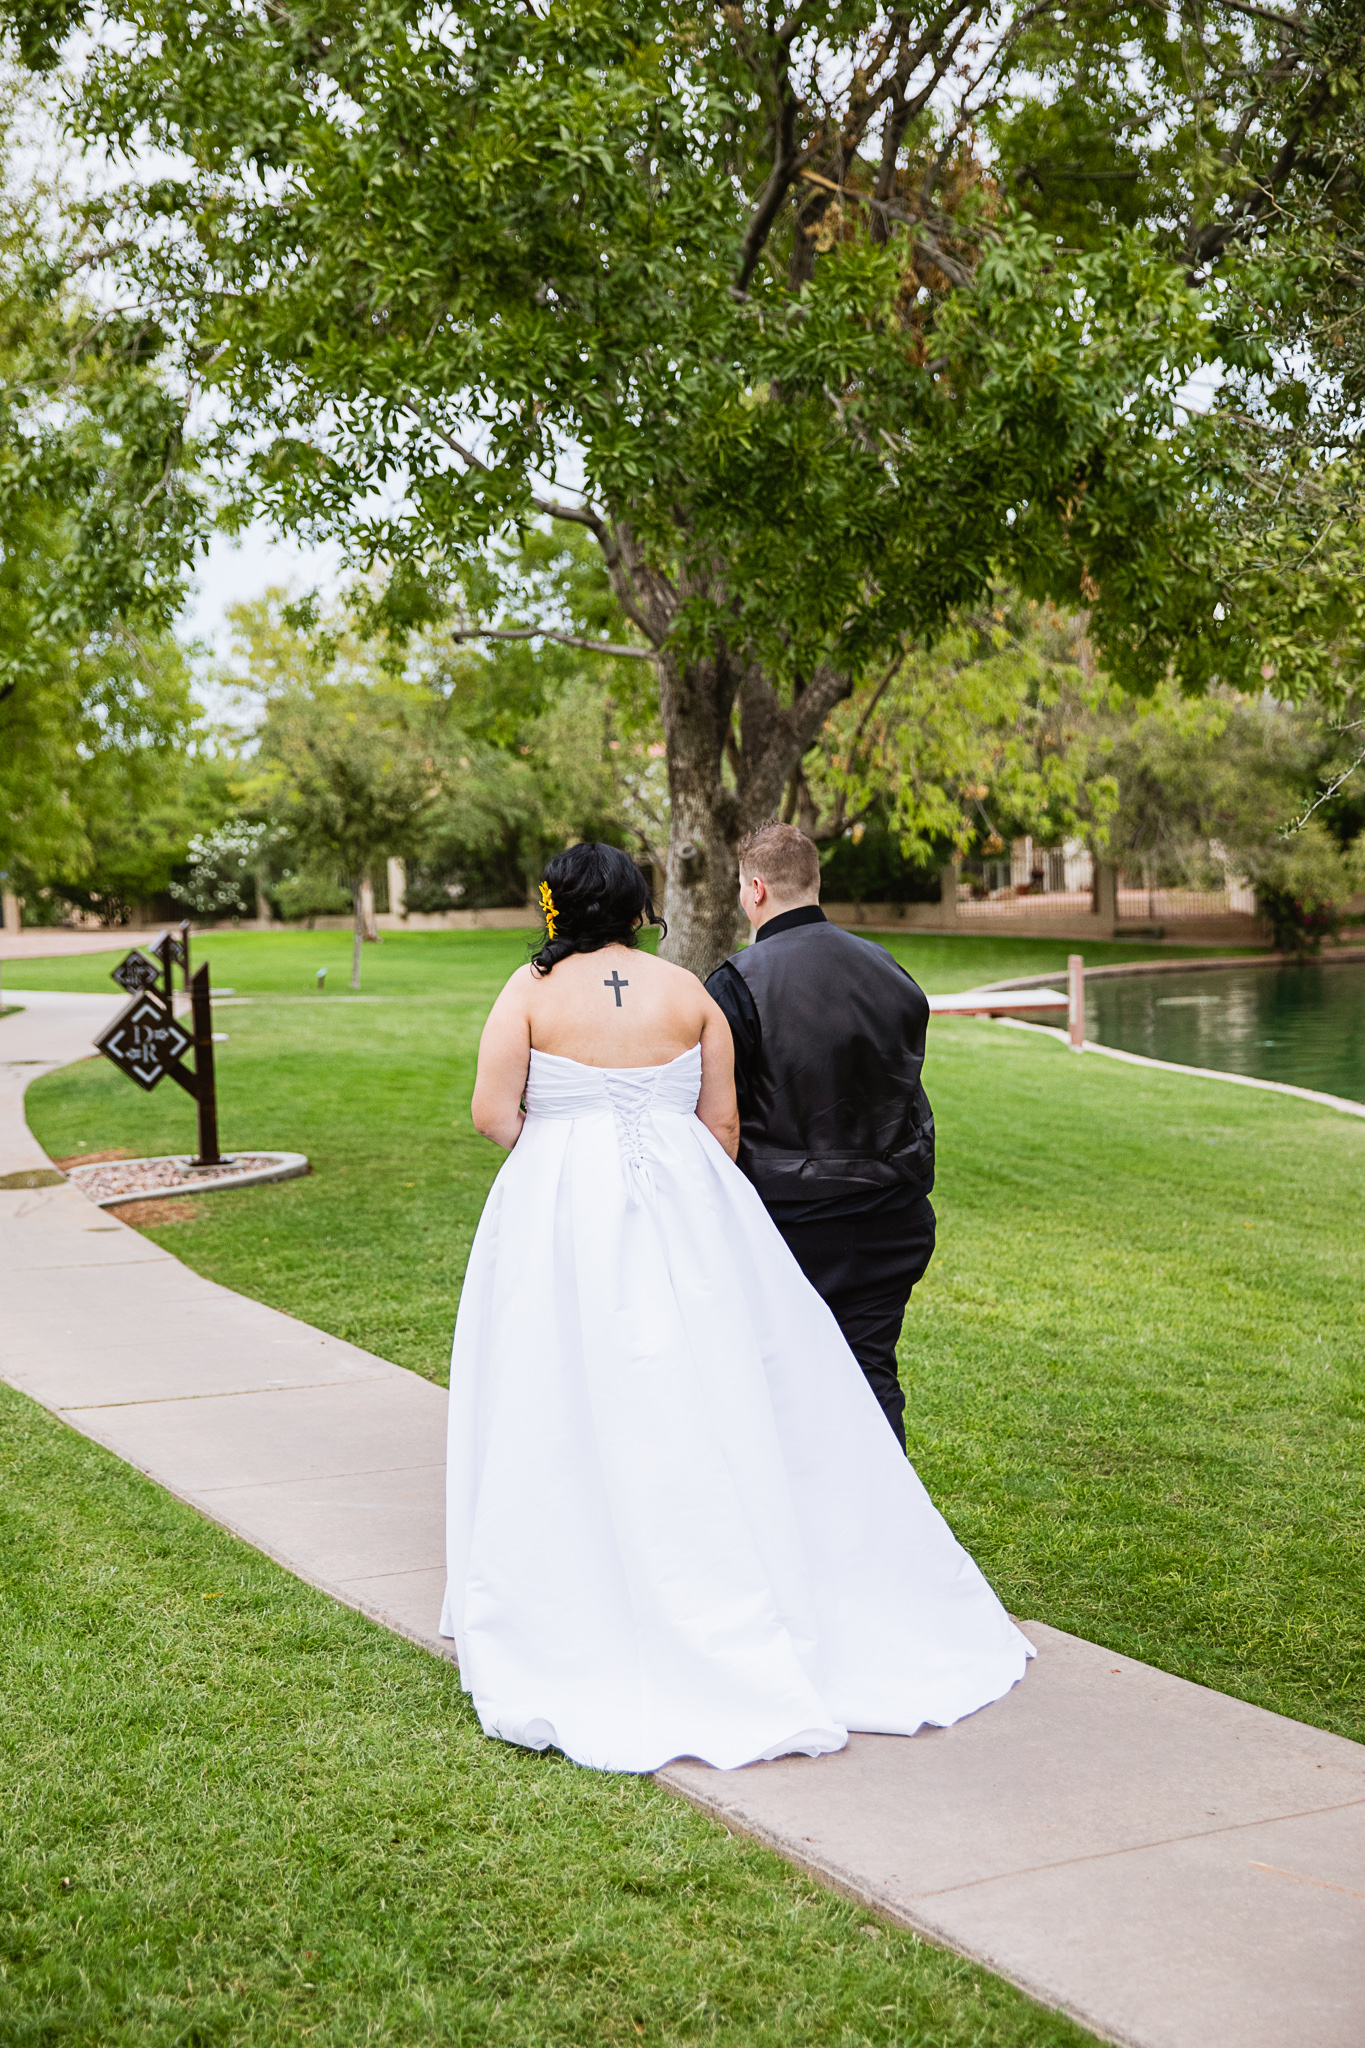 LGBT couple walking down a path in a park on their wedding day by Phoenix wedding photographers PMA Photography.